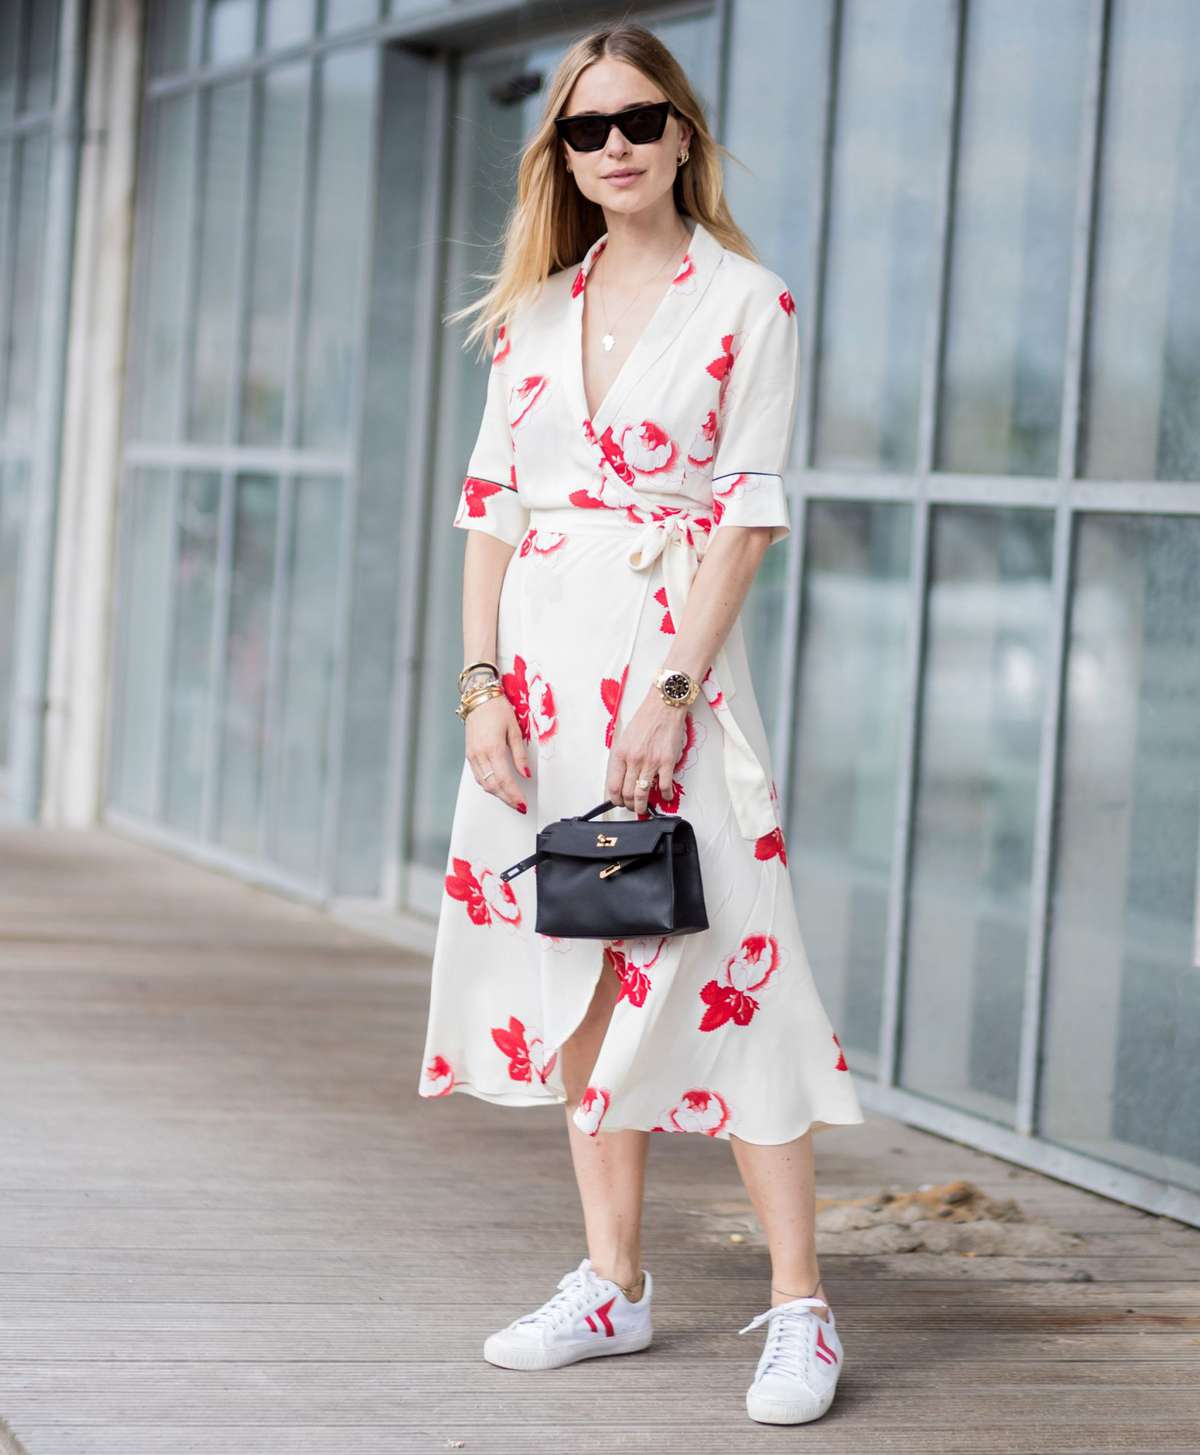 Chic Dress and Sneaker Pairings That 